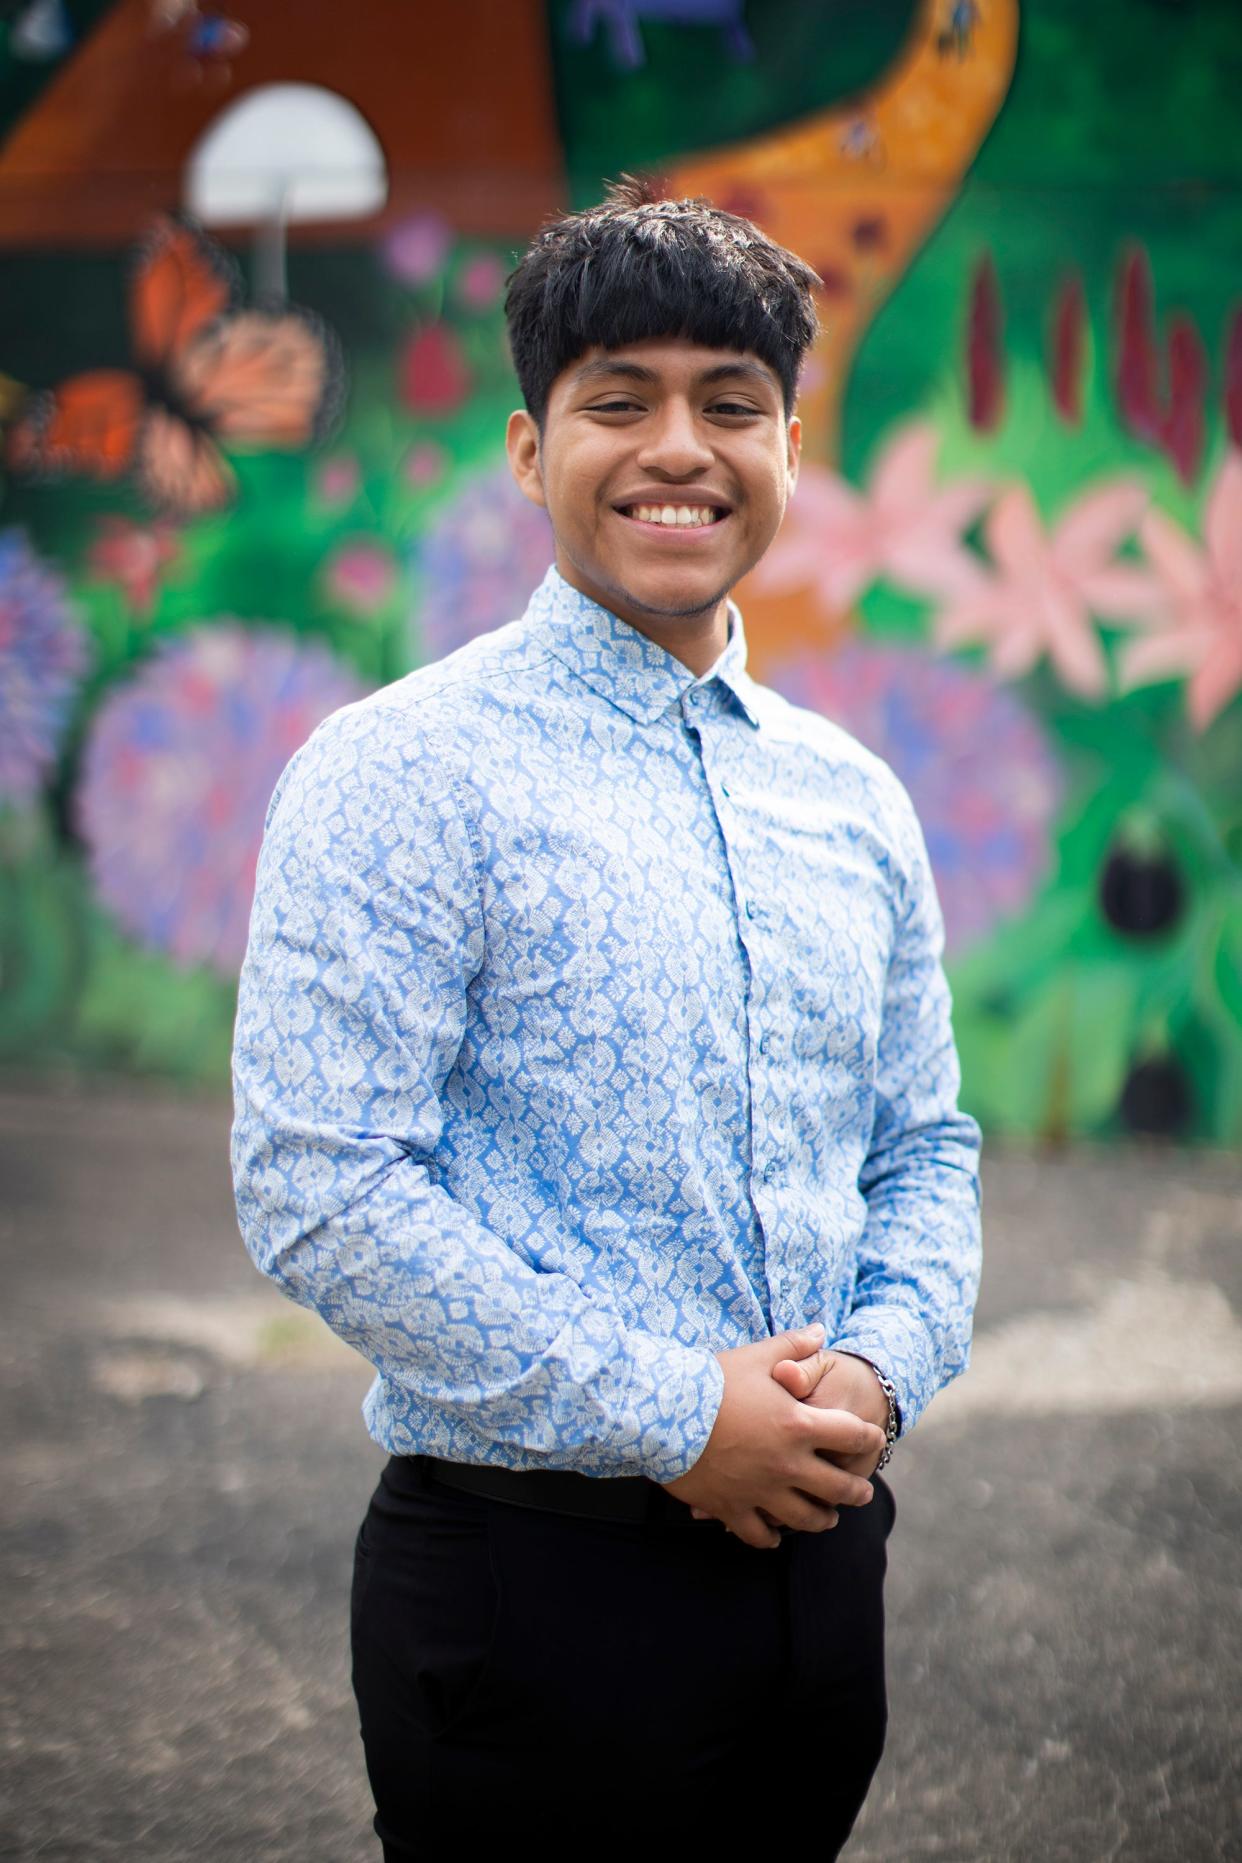 David Garcia Natividad, a Columbus City Schools graduate who received over $1 million in scholarships, will be attending Johns Hopkins University in the fall.